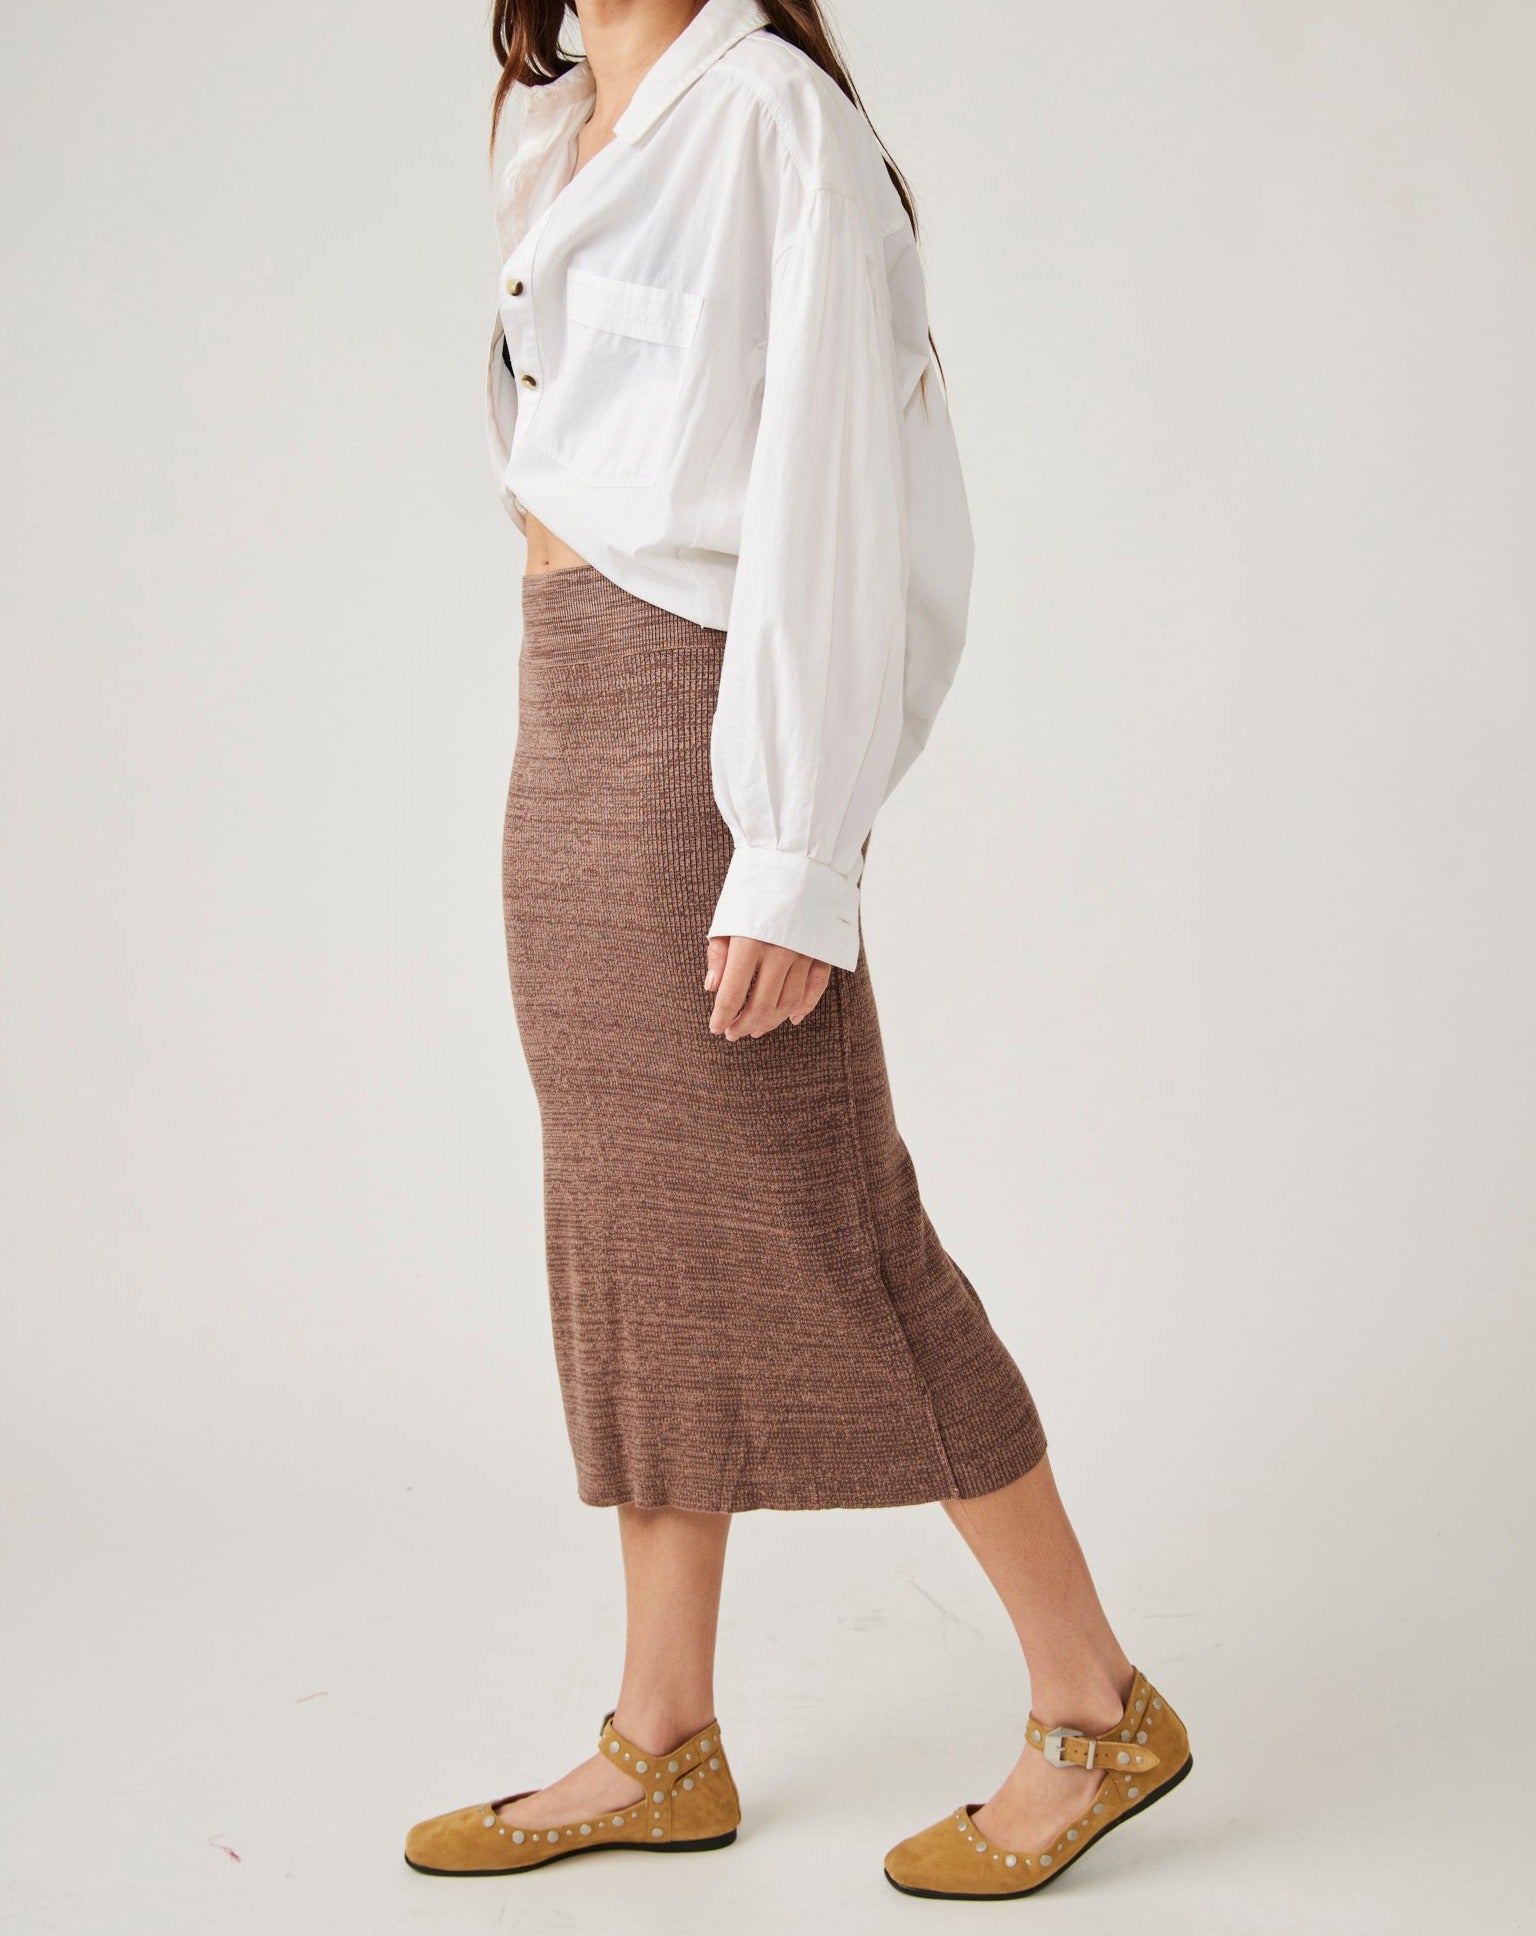 Golden Hour Midi Skirt Free People Canada